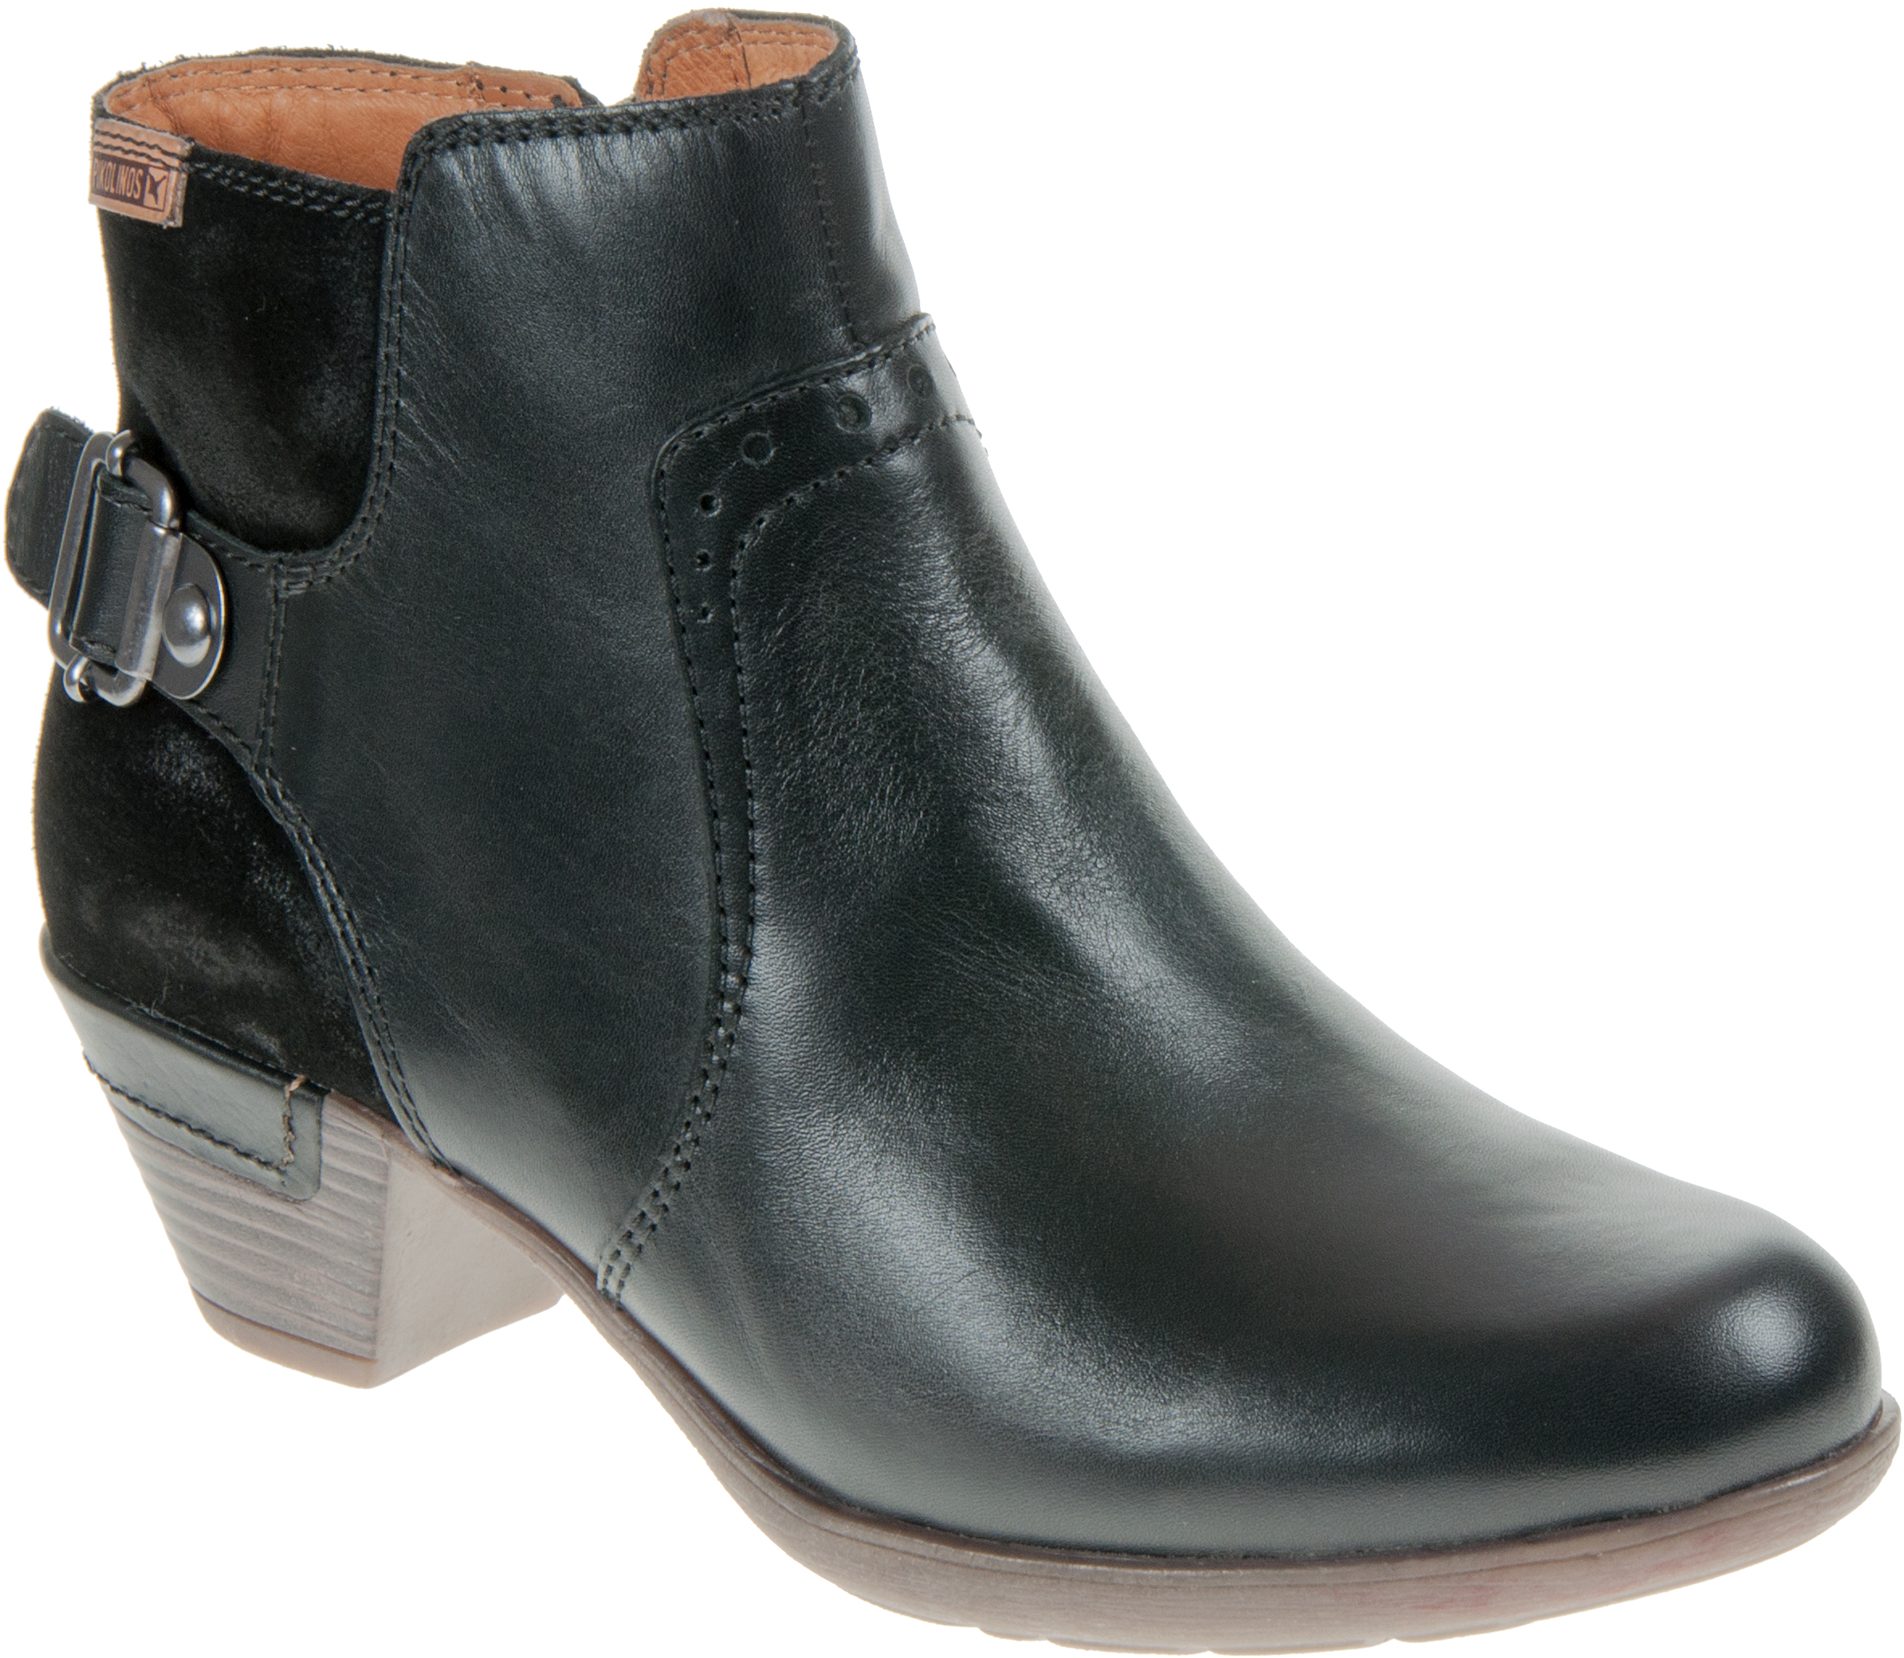 Pikolinos Rotterdam Black 902-9945 - Ankle Boots - Humphries Shoes